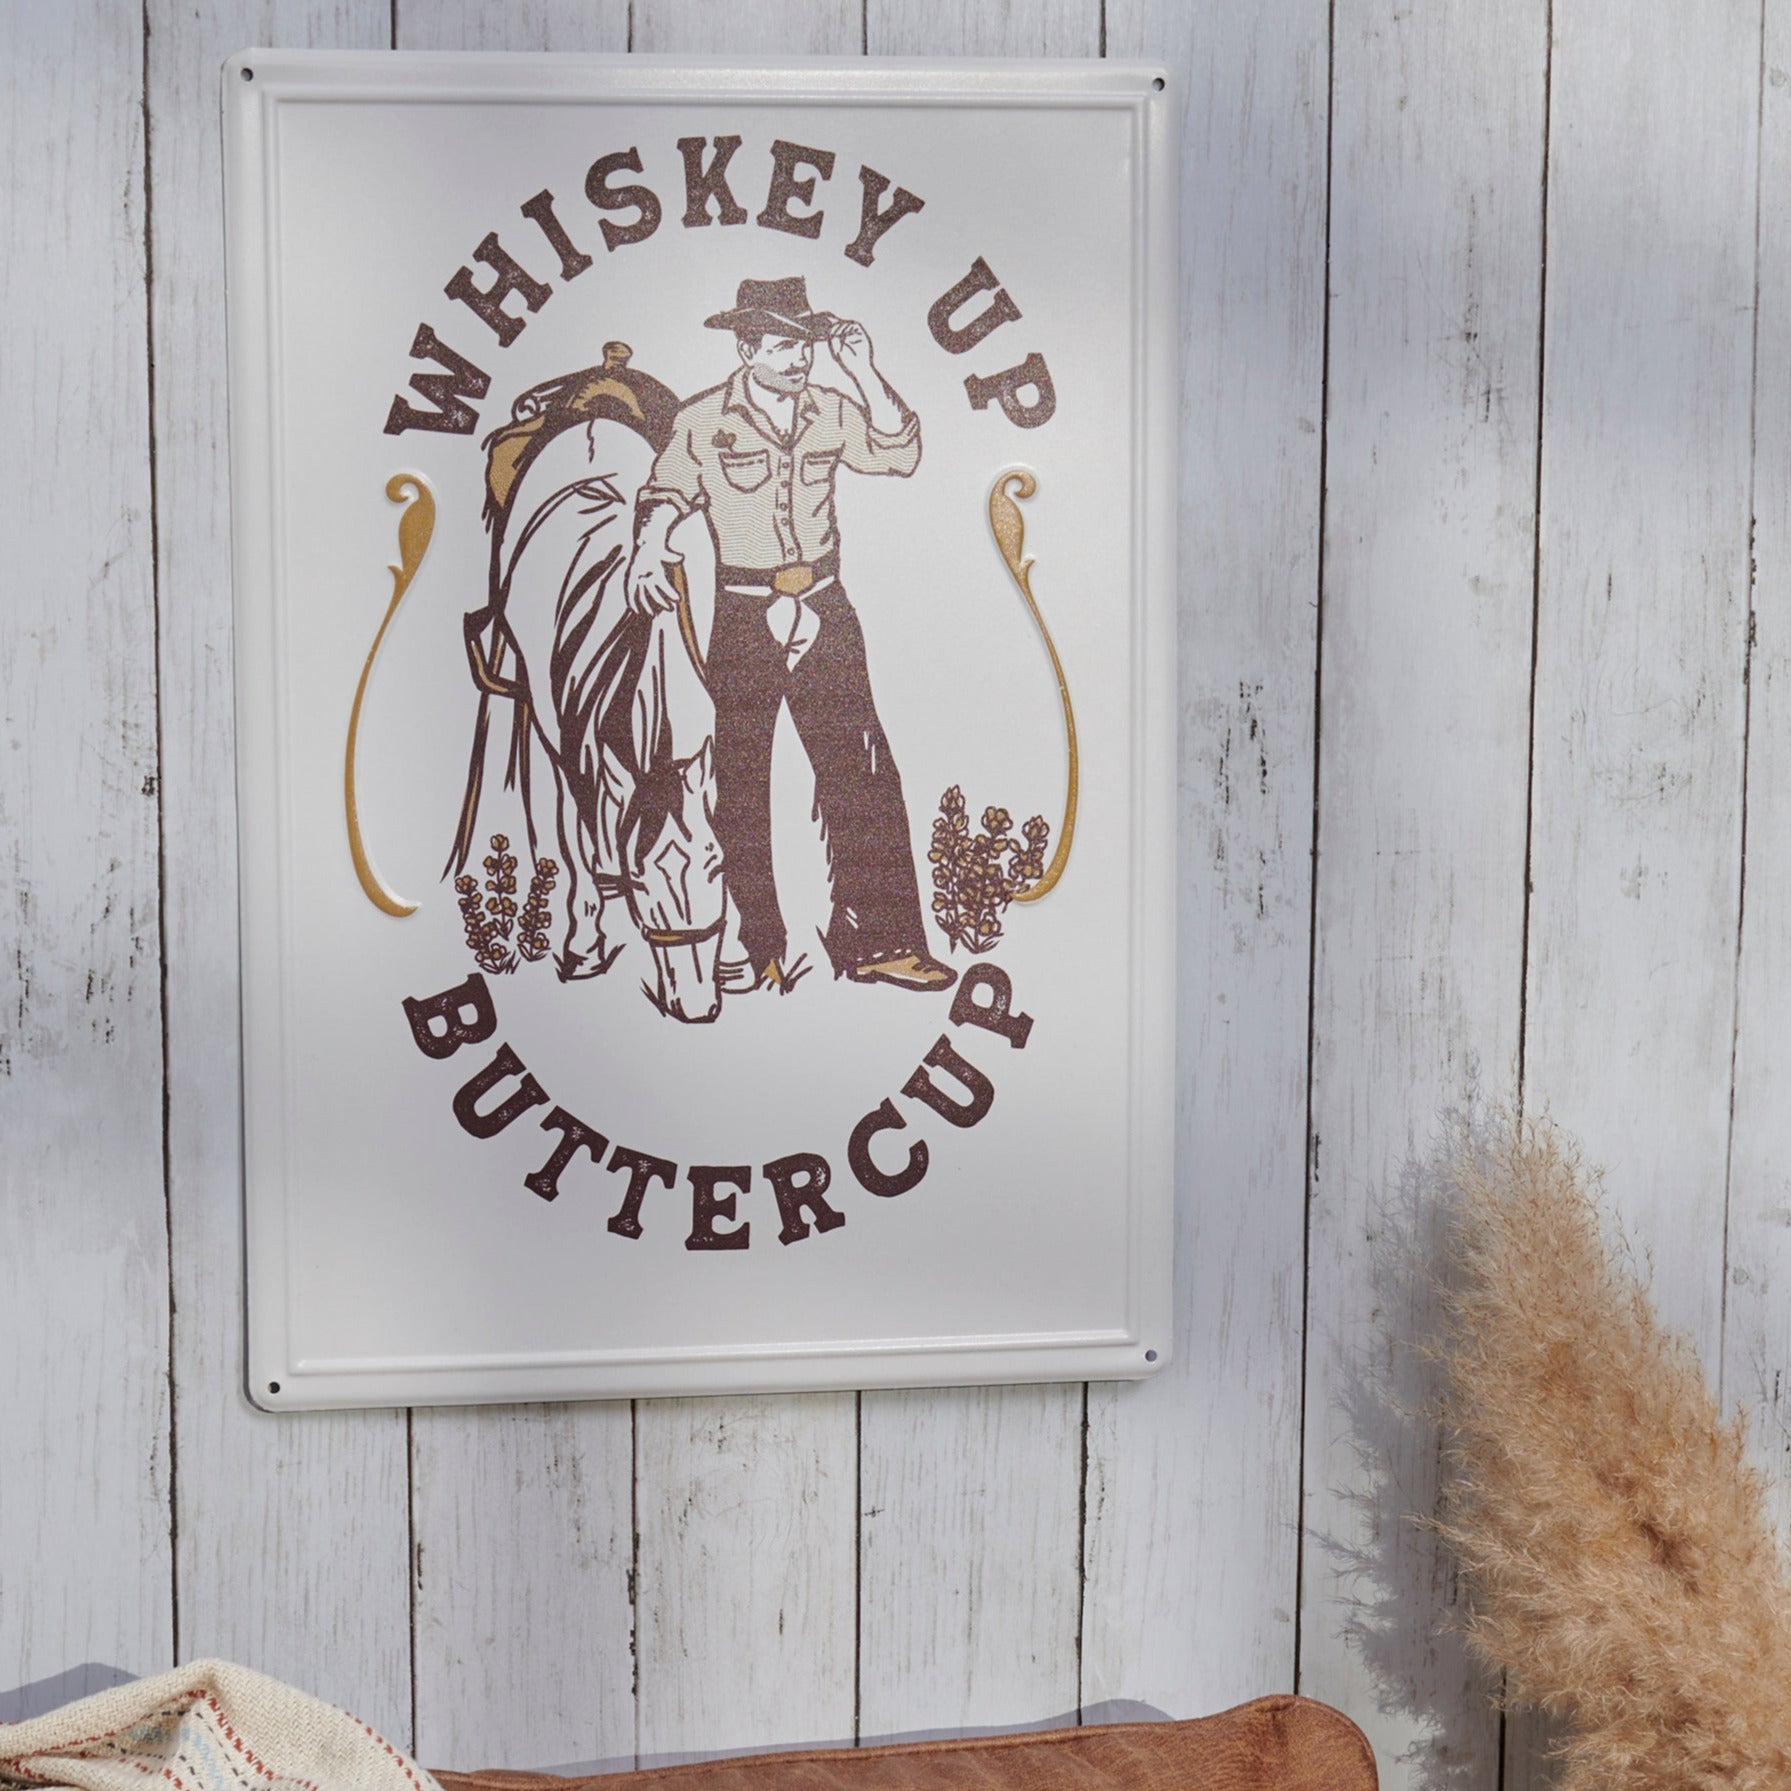 Whiskey Up Wall Decor | Western-inspired Cowboy Metal Wall Hanging Decor